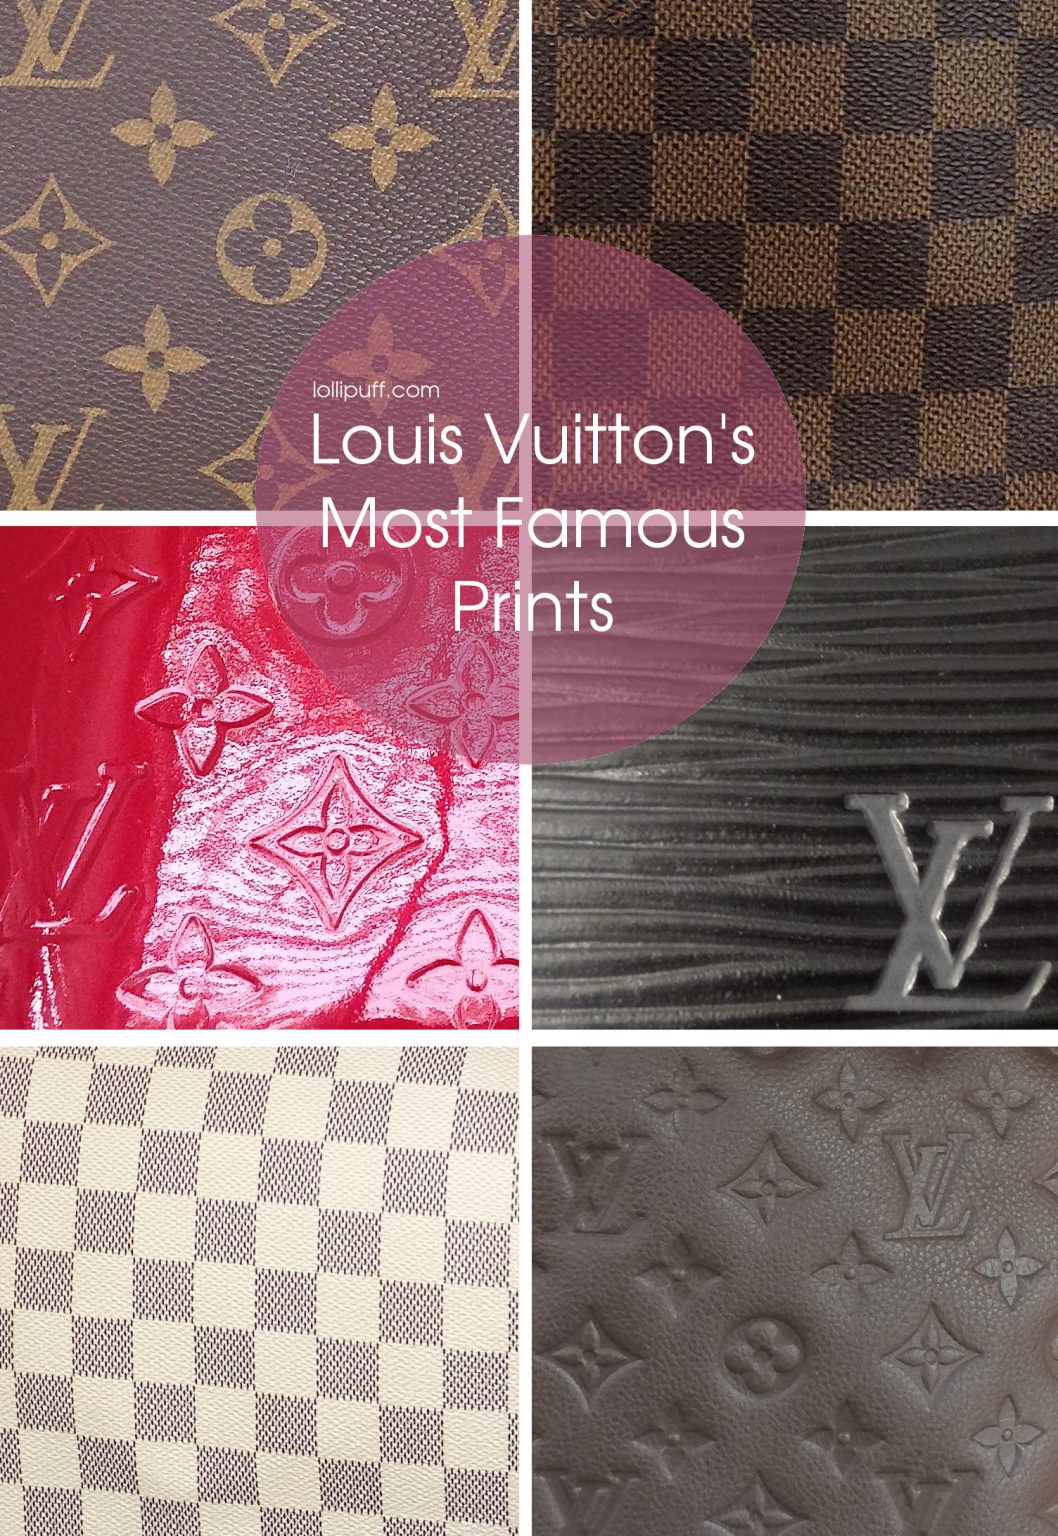 Louis Vuitton Poster Of Edward Barber & Jay Osgerby R99684 Multi - US